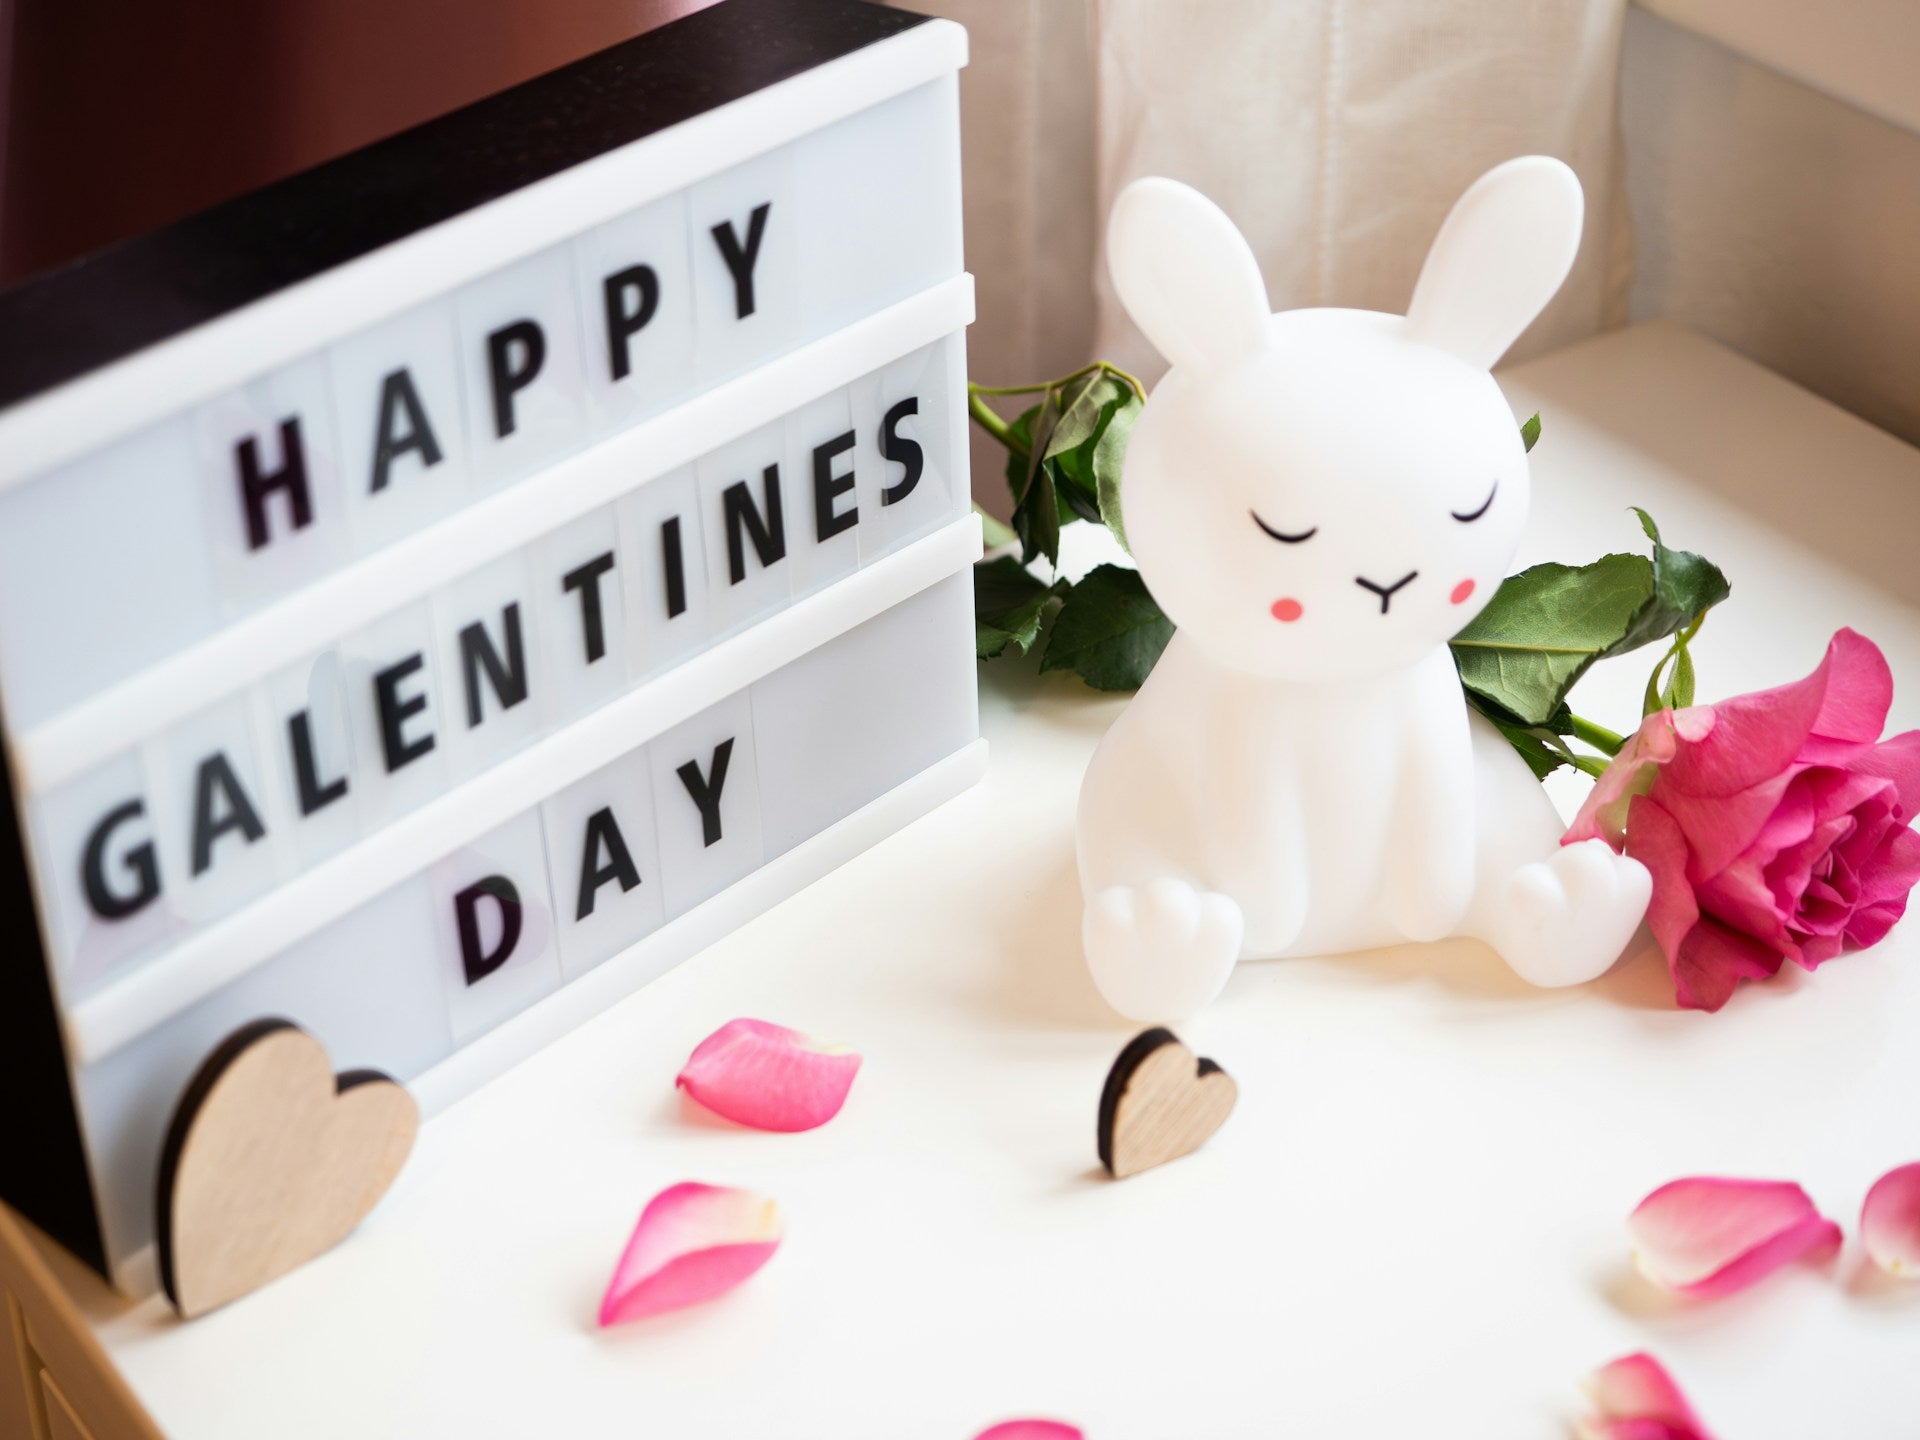 A bunny figure and rose beside a light board that reads "Happy Galentine's Day."